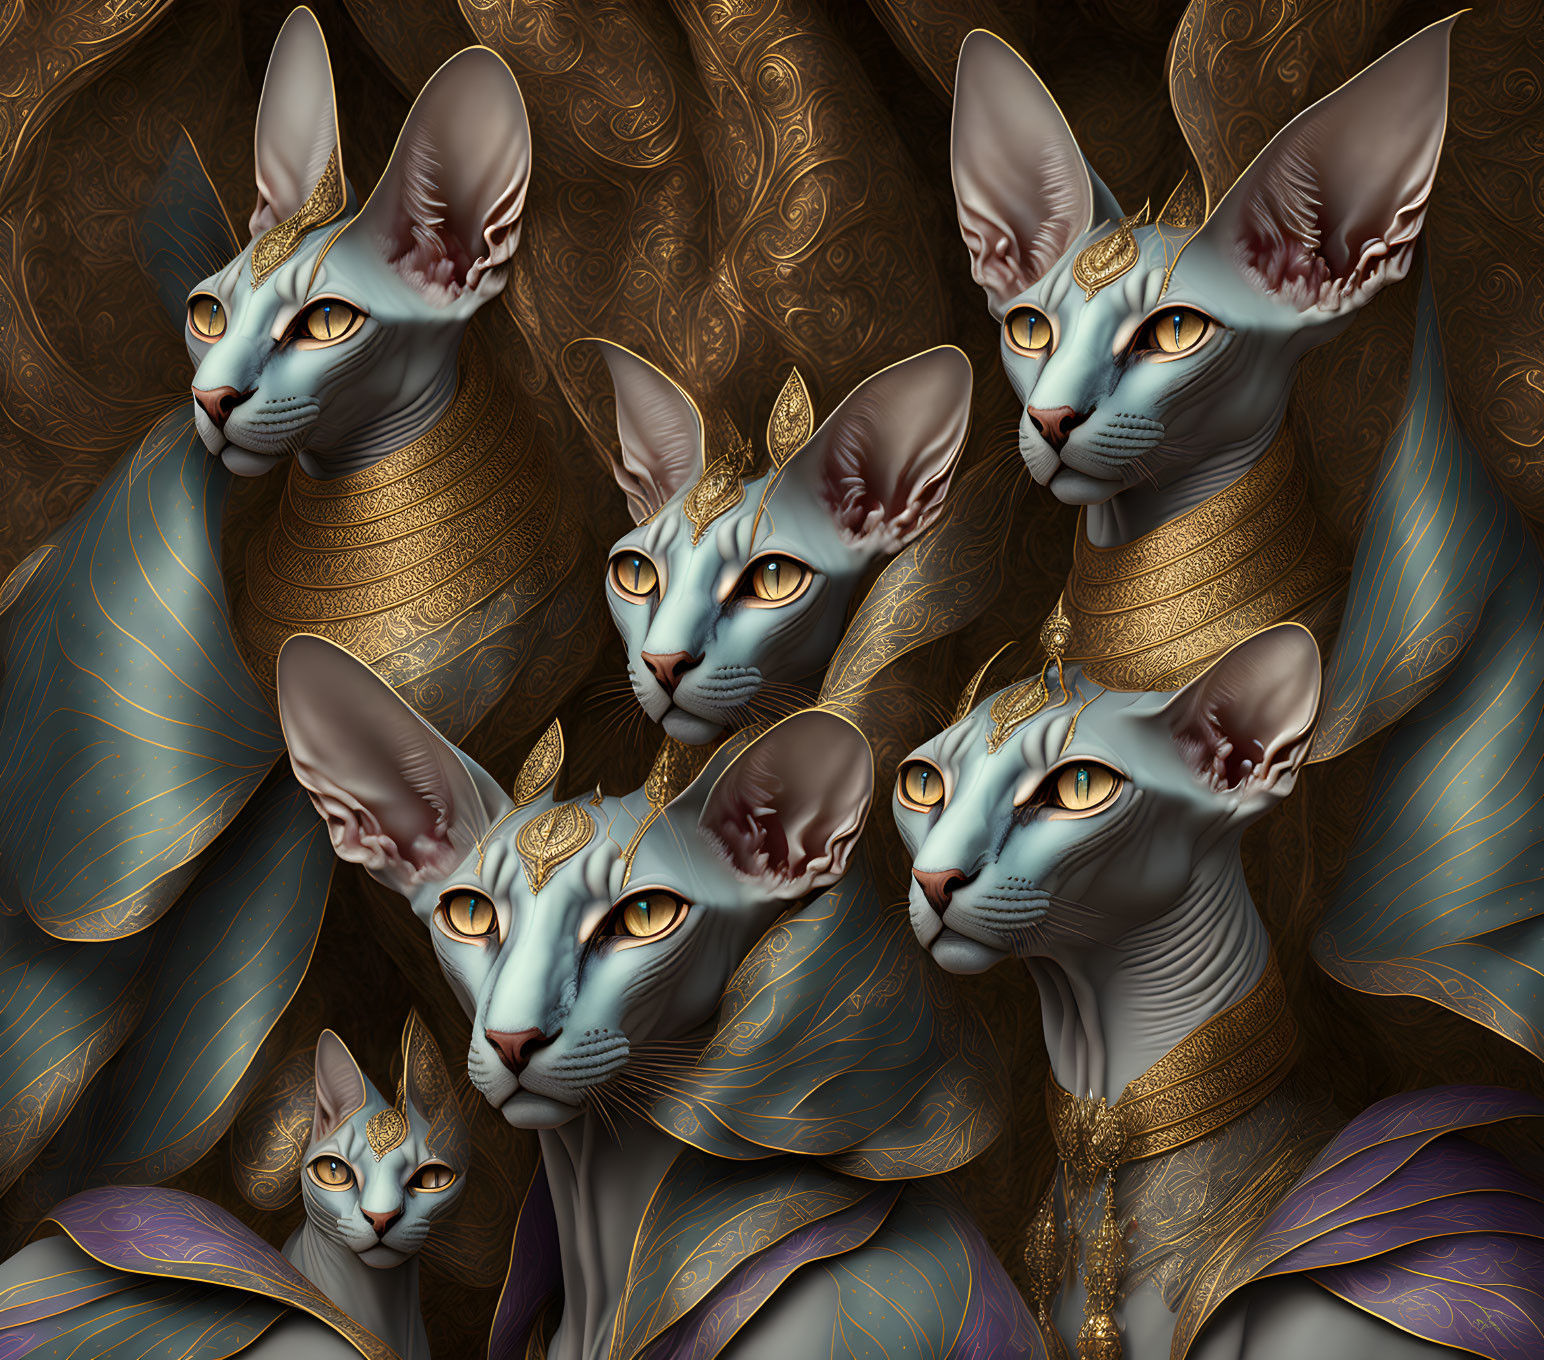 Stylized Sphynx Cats in Gold Jewelry on Brown Background